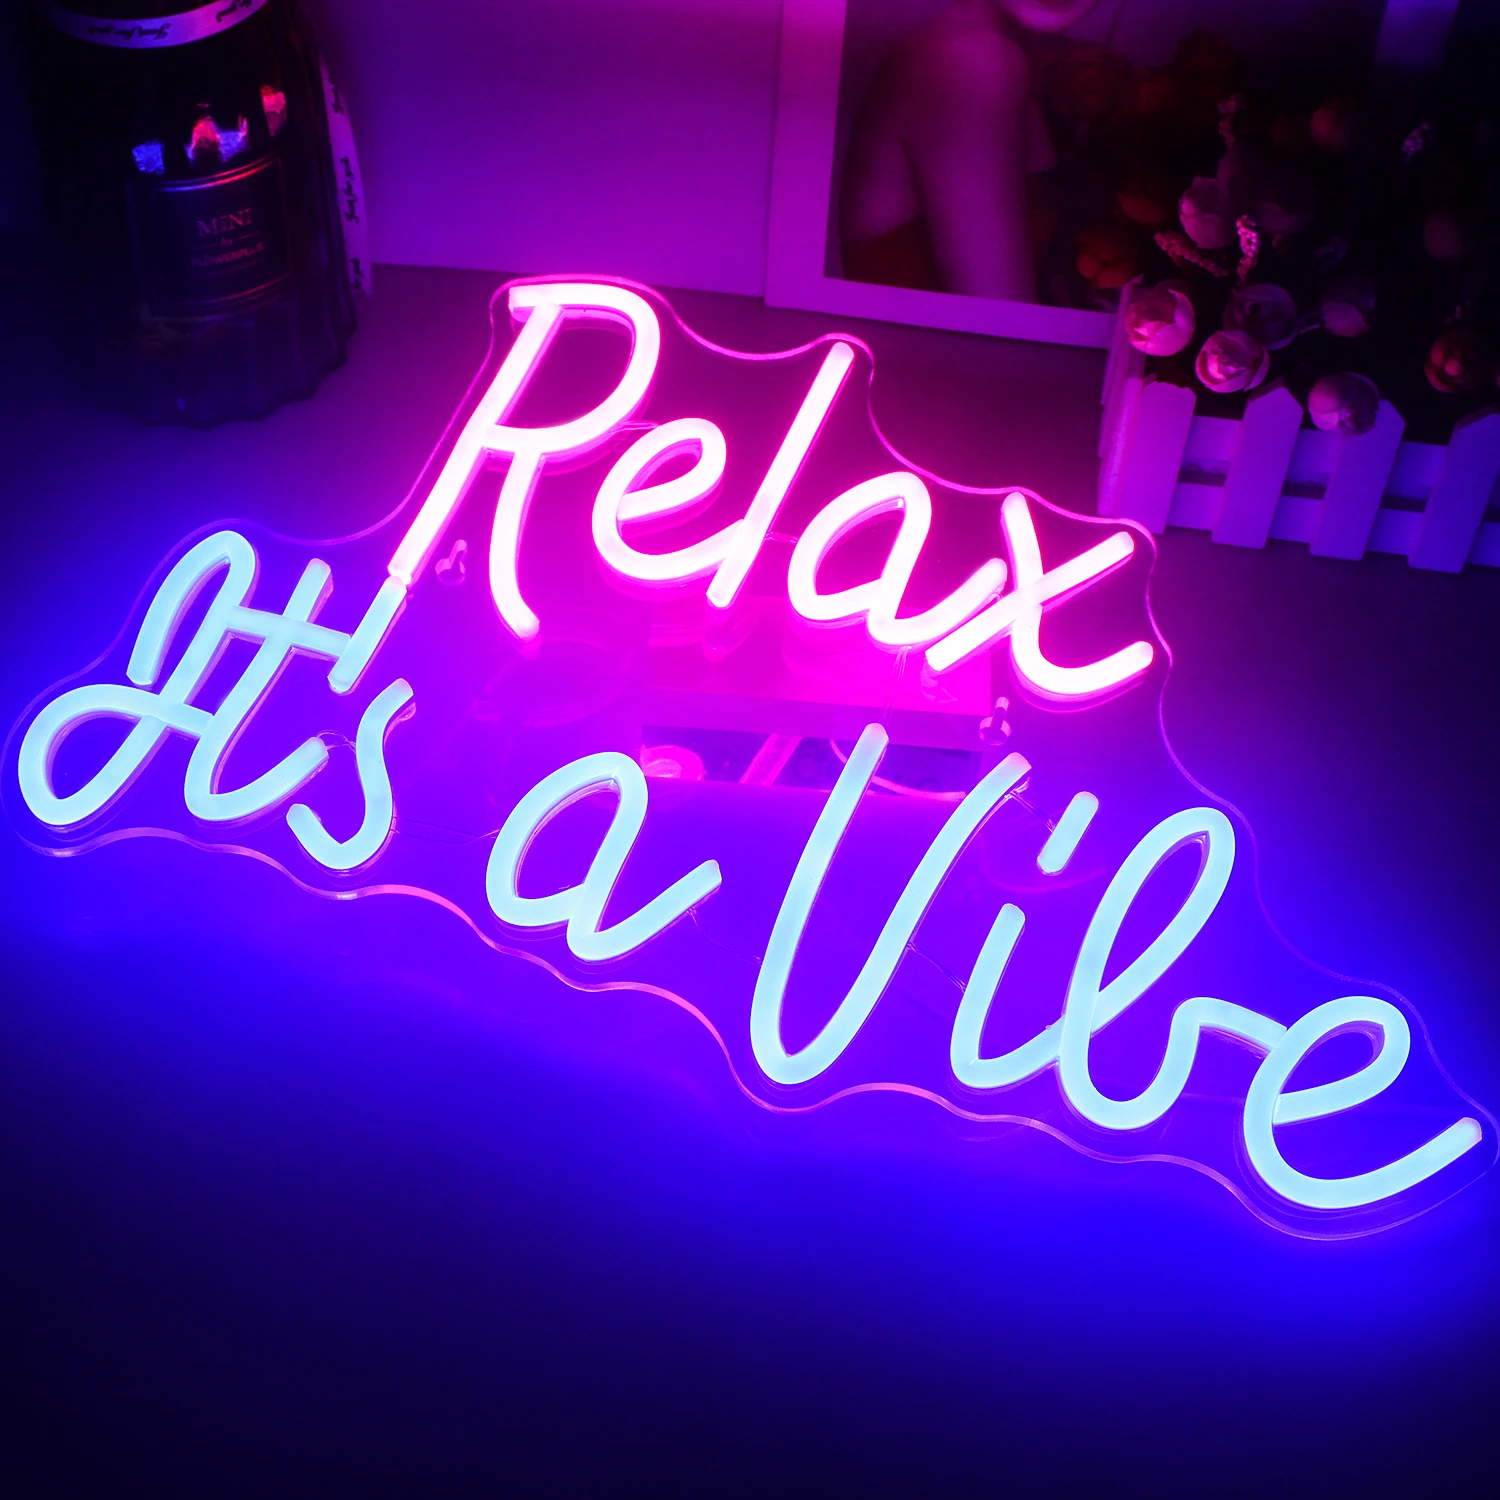 Relax It's a Vibe Neon Sign LED Room Wall Decor USB Powered For Party Bedroom Game Room Club Party Gaming Light Man Cave Decor